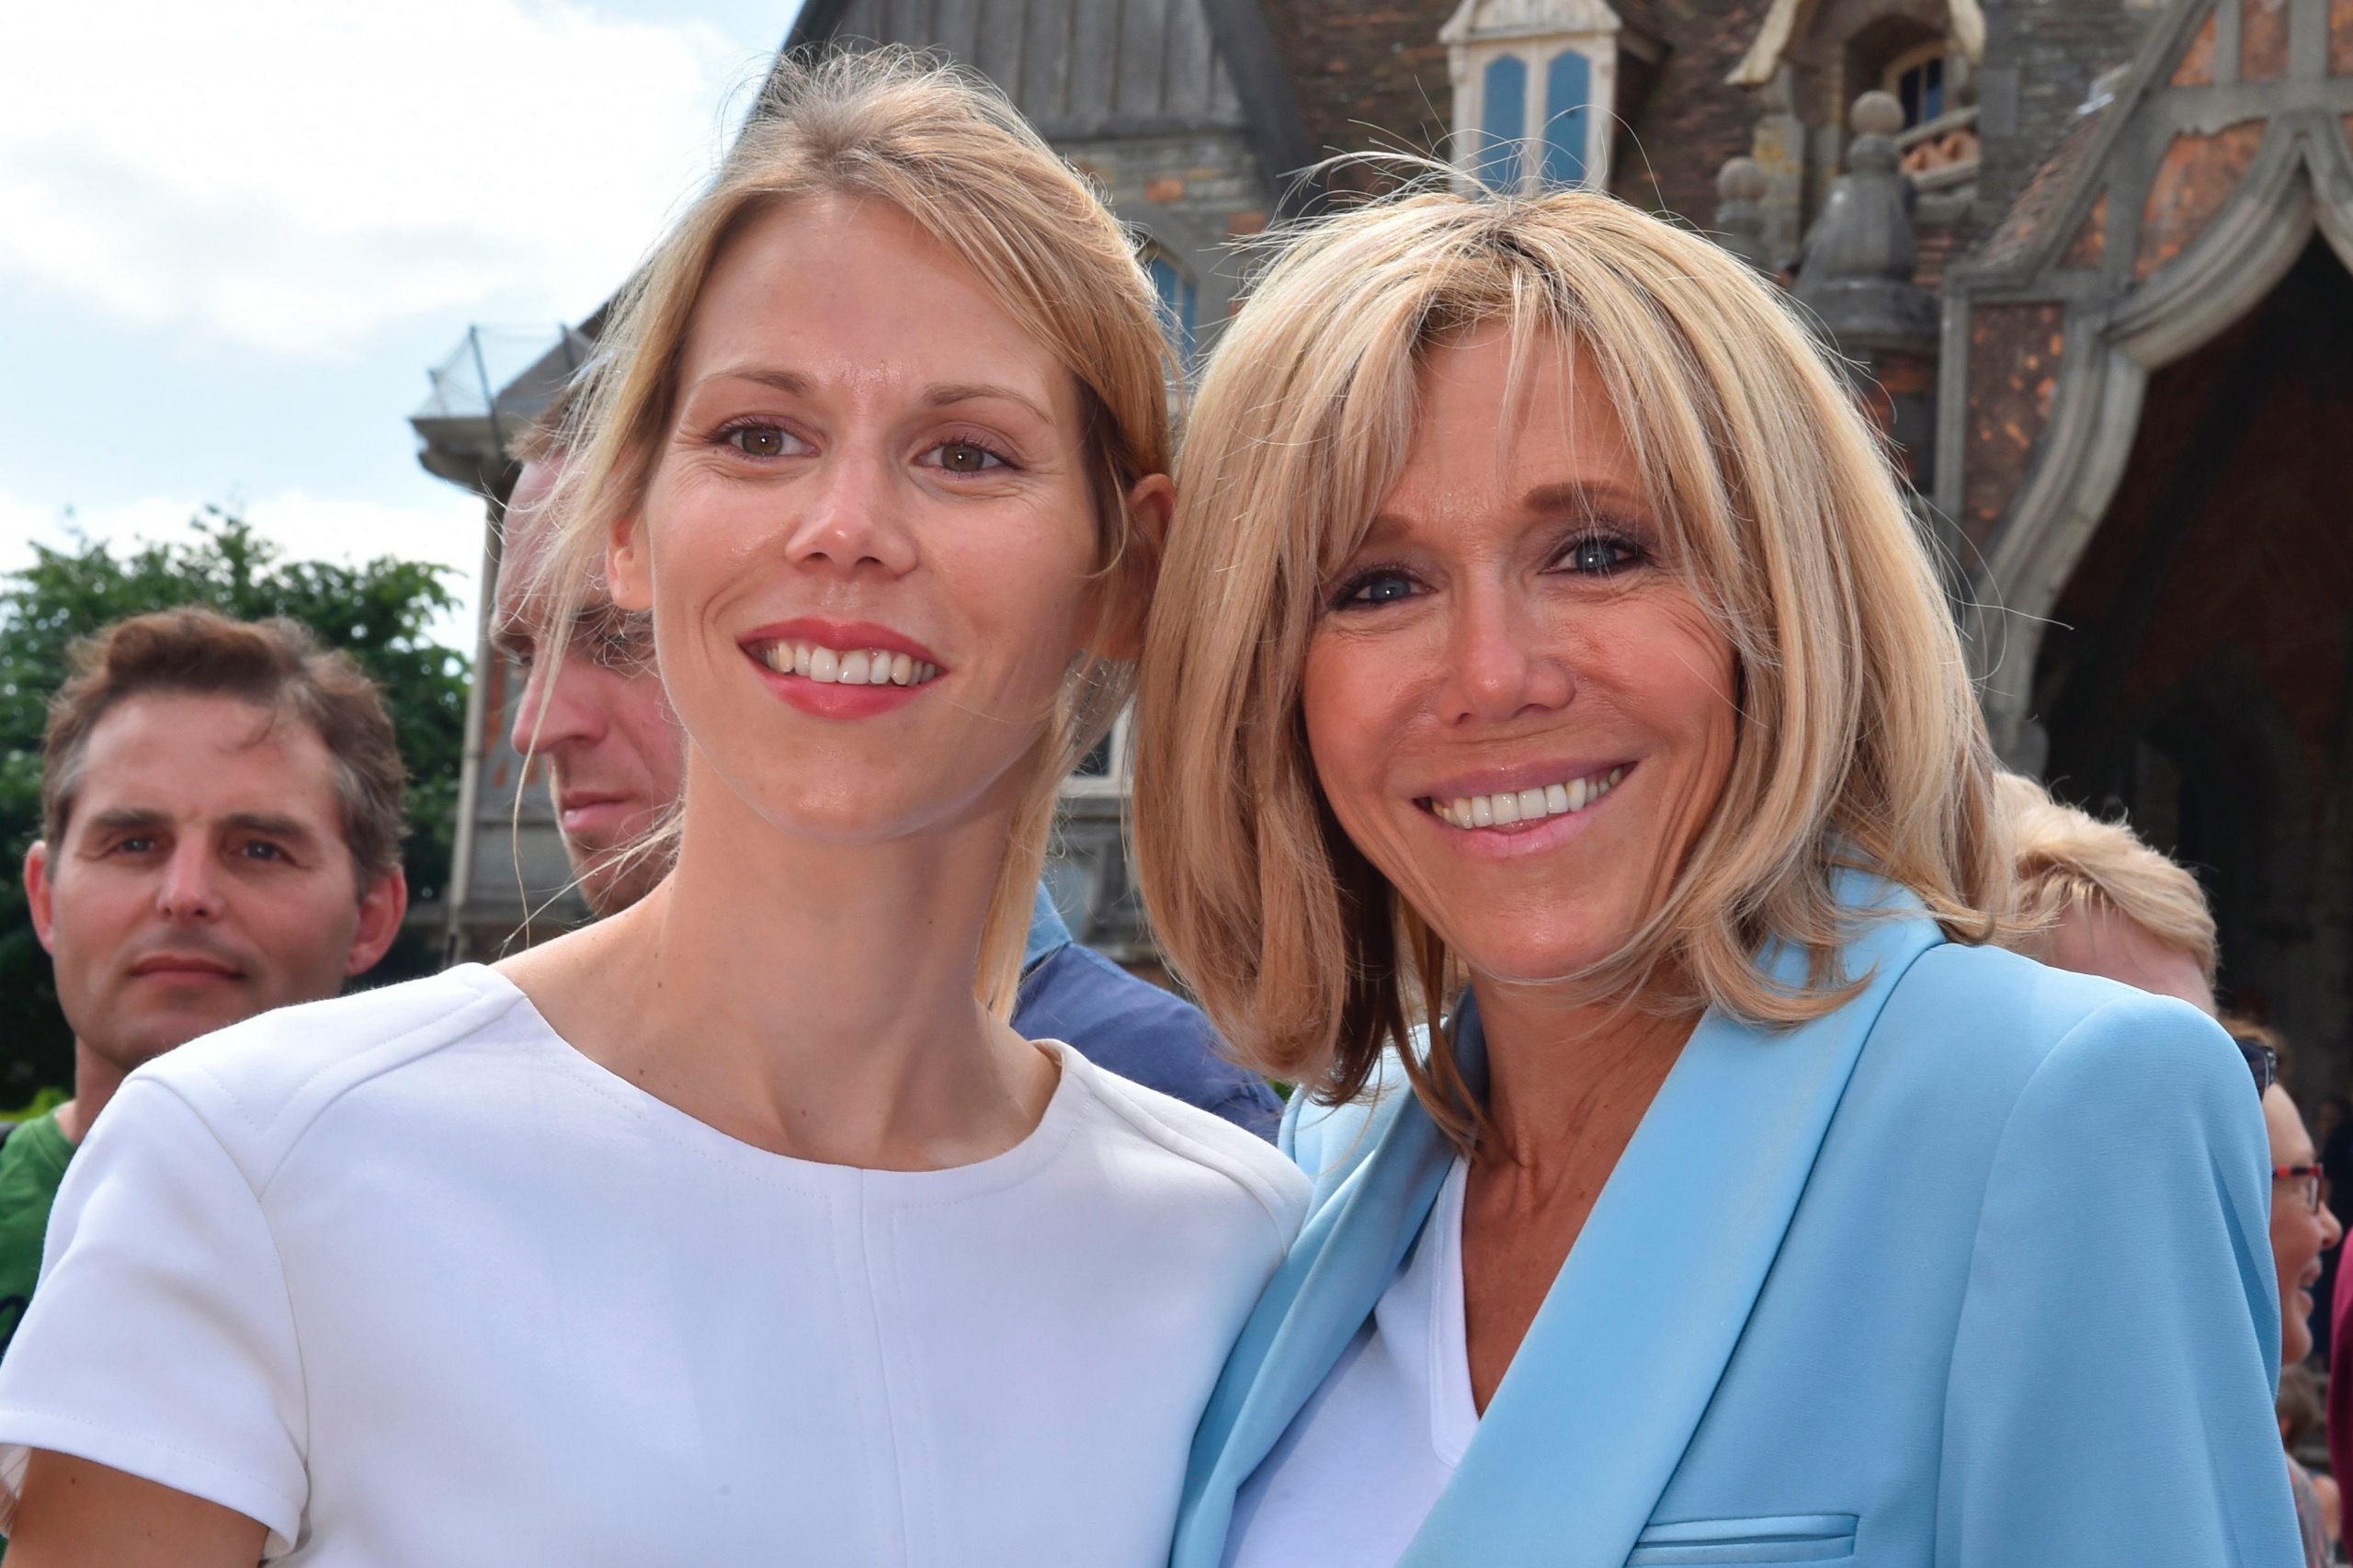 Tiphaine Auzière, the step daughter of Macron